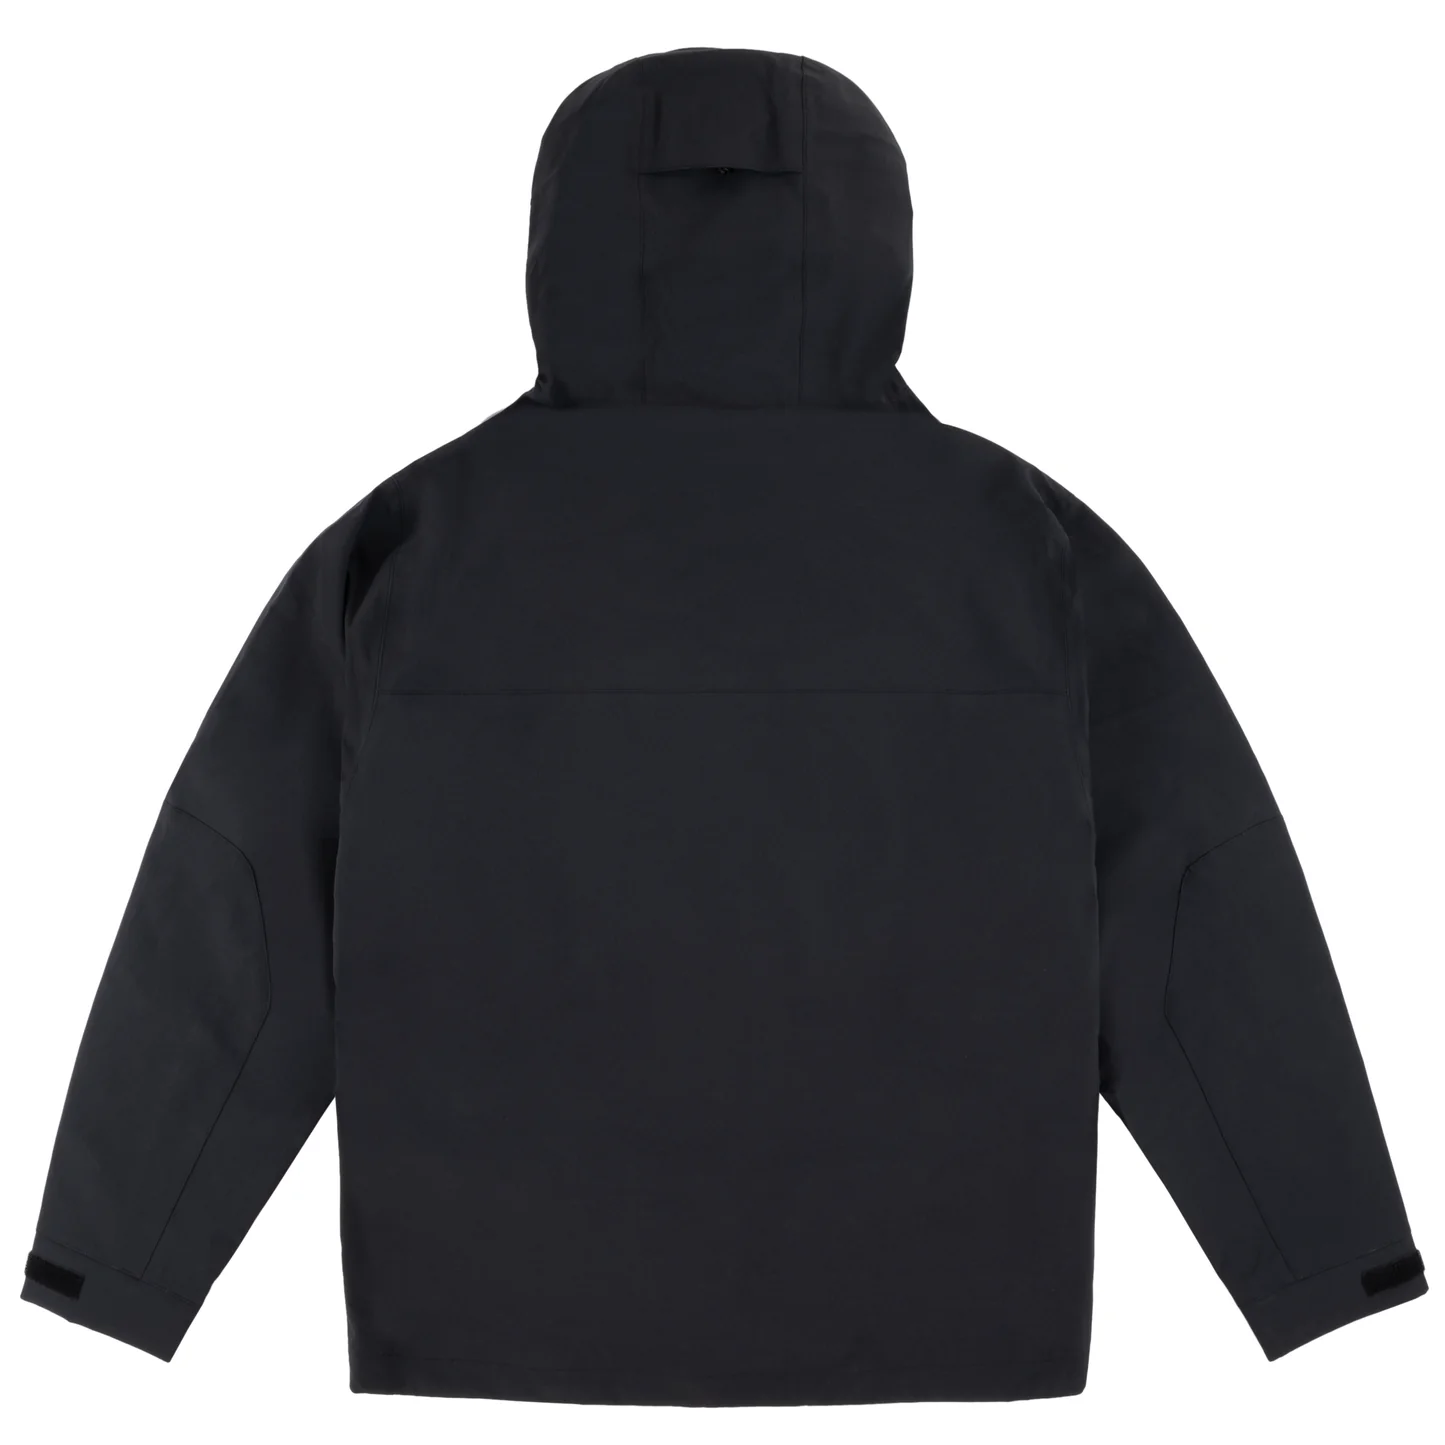 Souvenir 3 Layer Ripstop Shell Jacket - Outtabounds